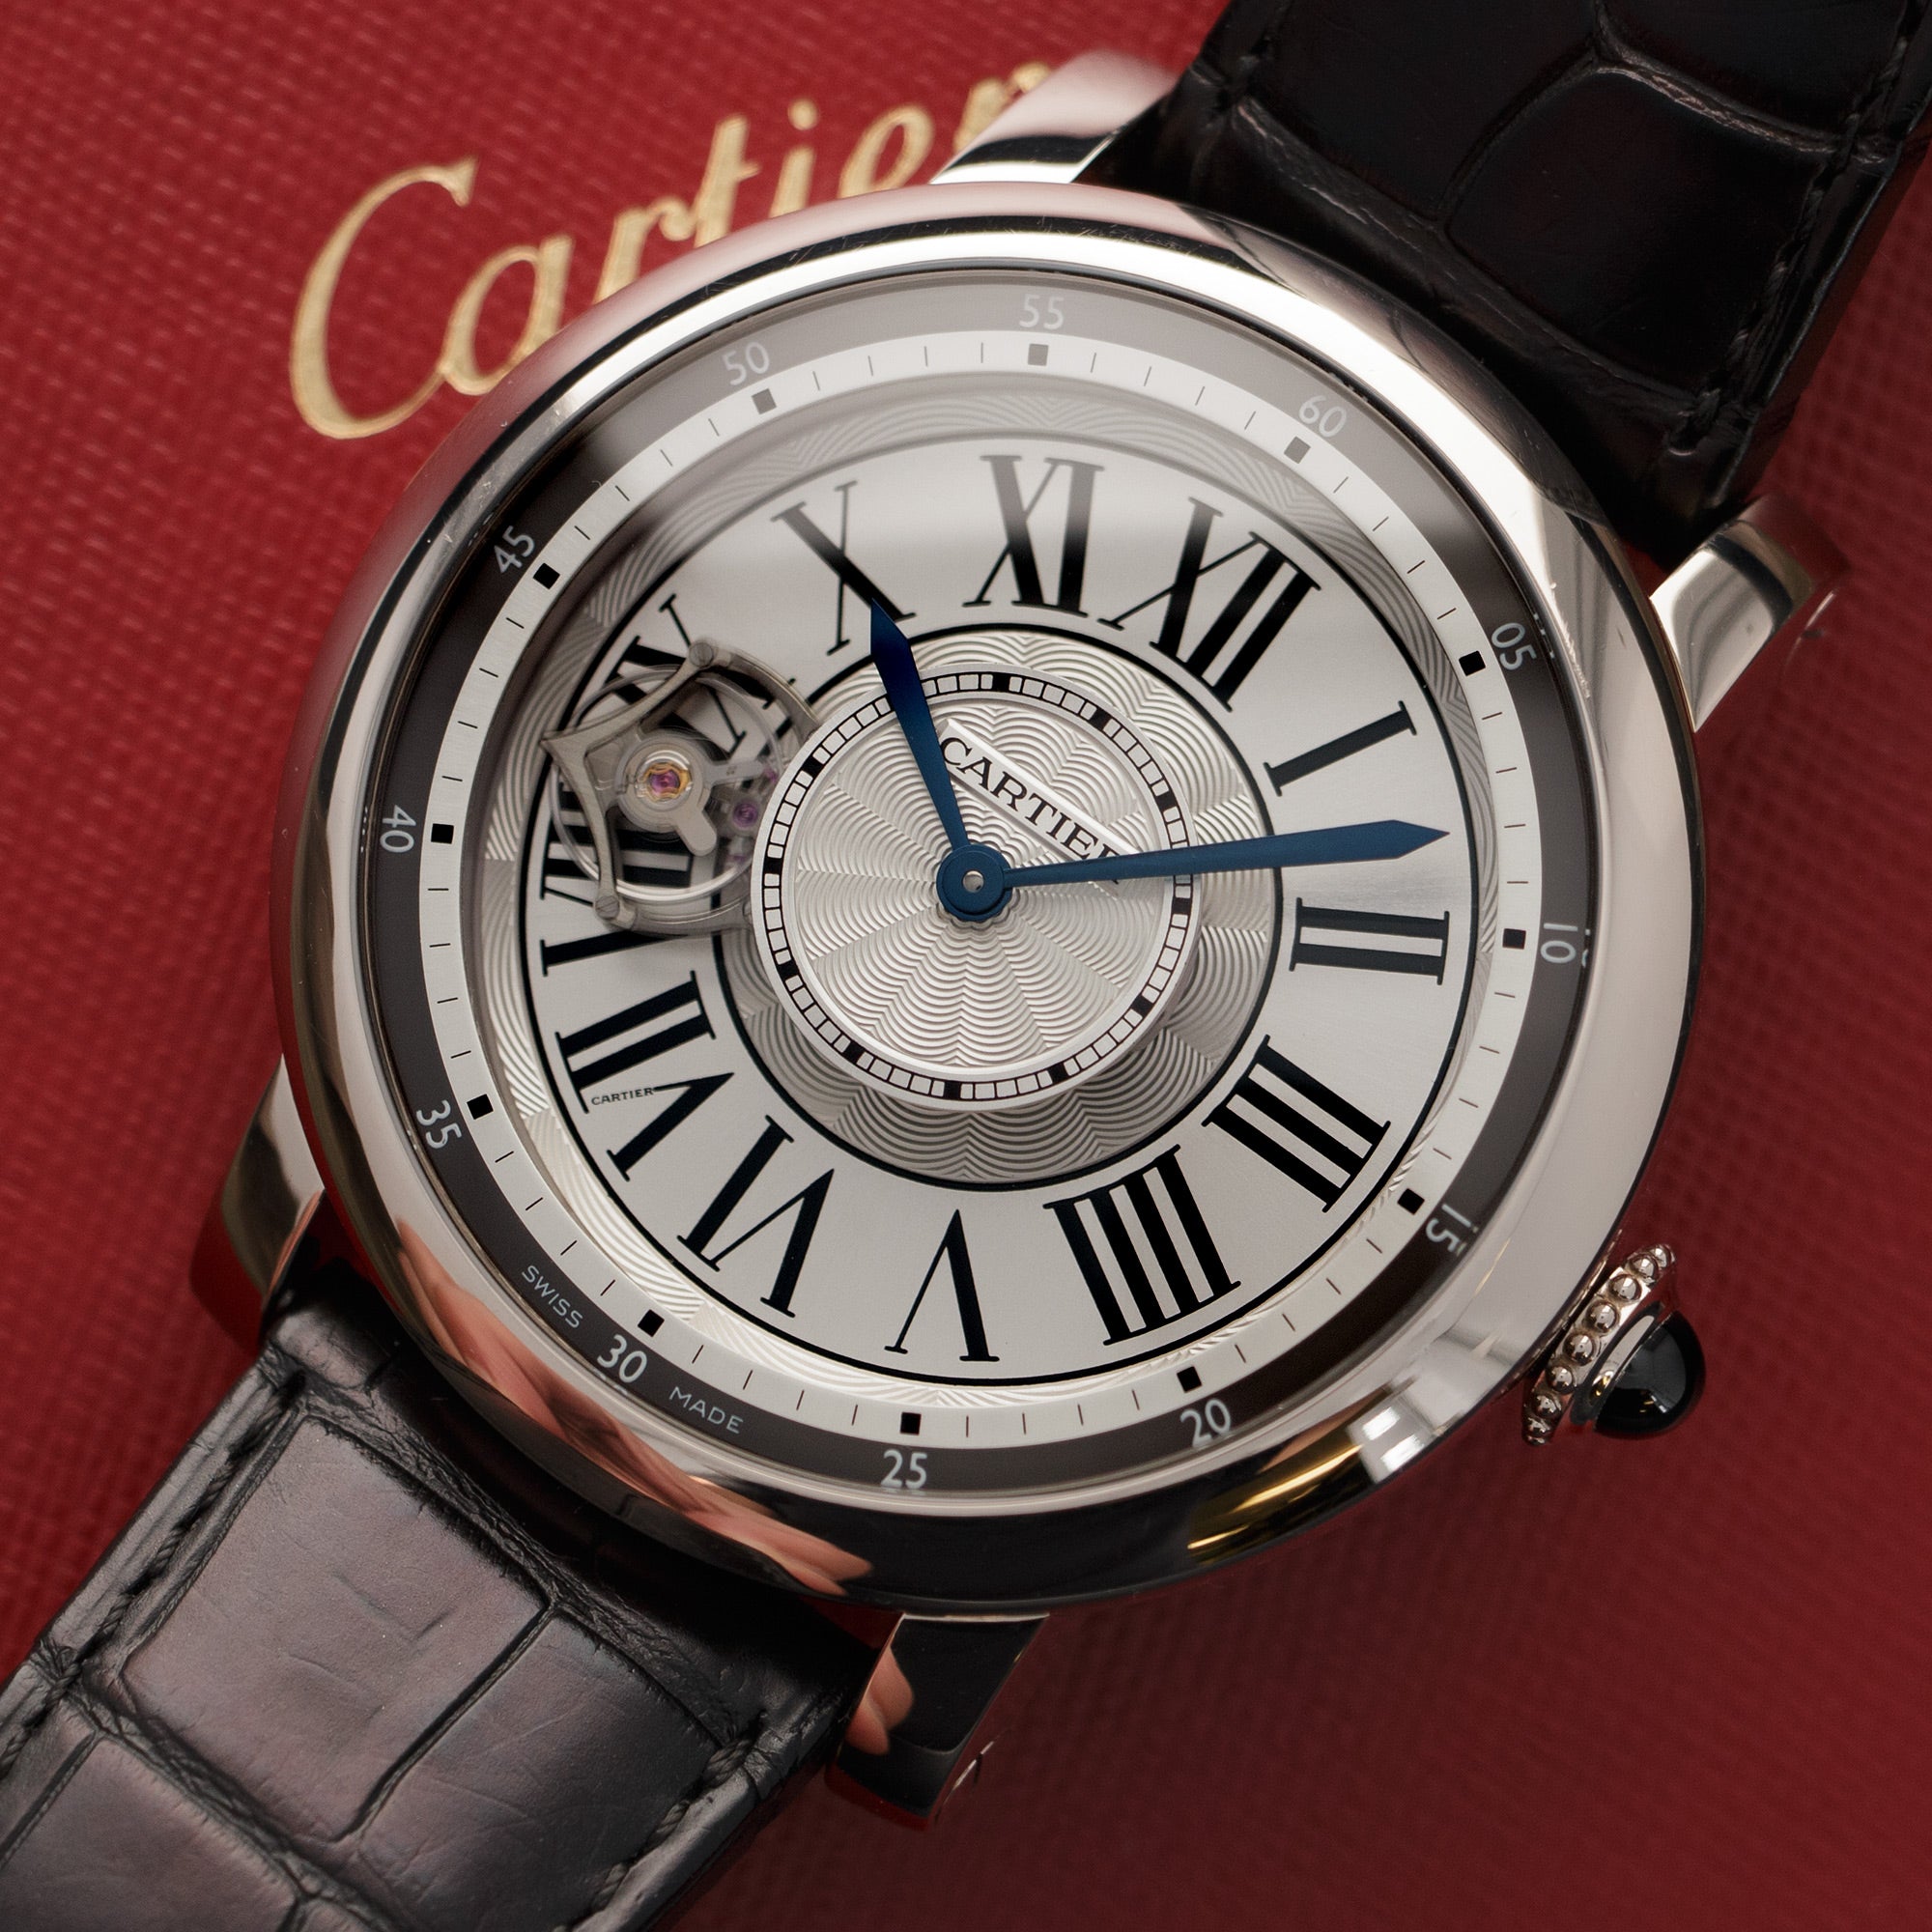 Cartier - Cartier White Gold Rotonde Astrotourbillon Watch Ref. W1556204 - The Keystone Watches